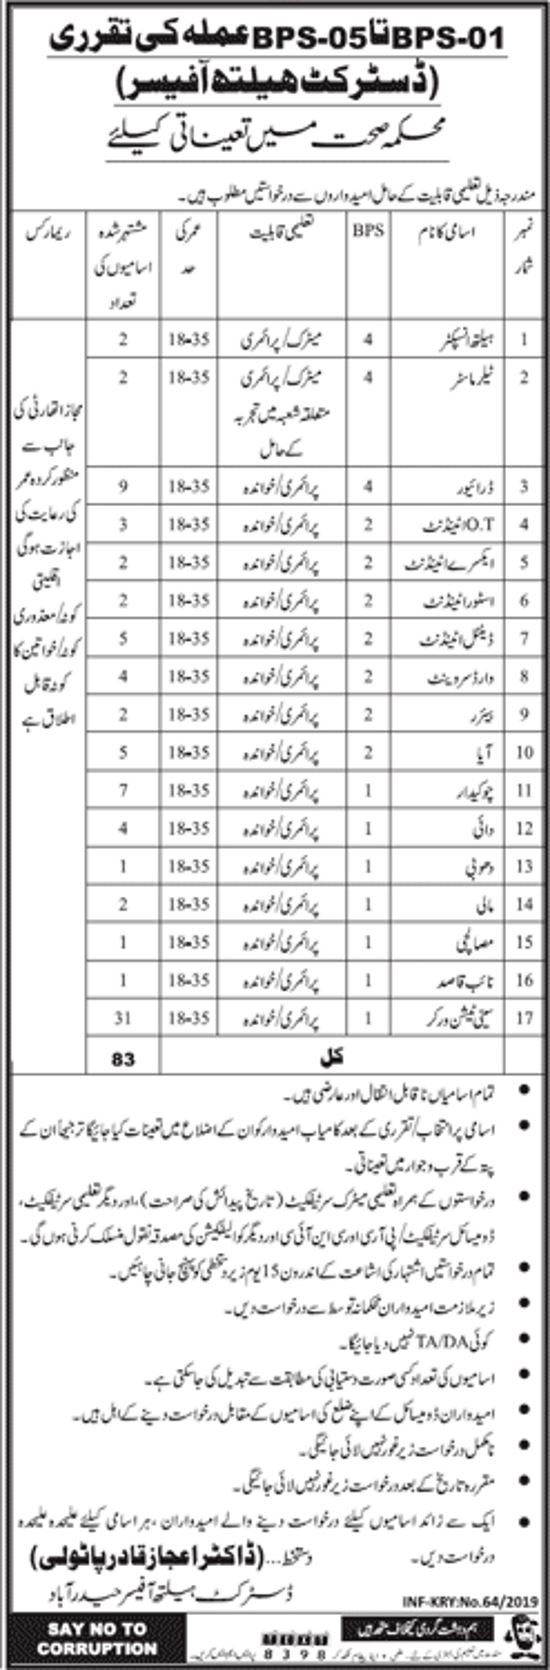 Sindh Health Department Jobs 2019 for 83+ Health Inspectors, Drivers & Support Staff